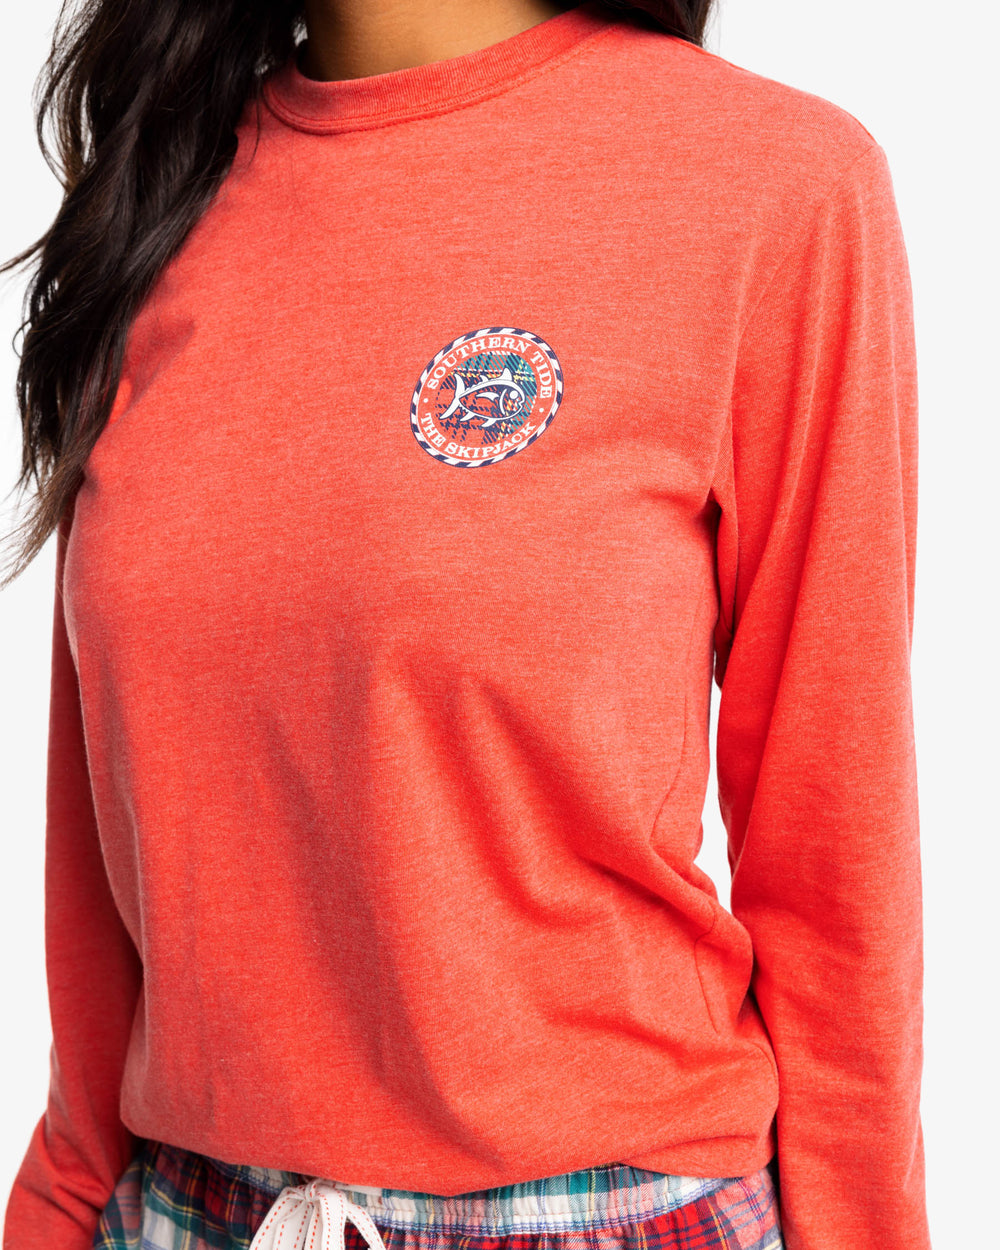 The detail view of the Southern Tide Women's Heather Plaid Skipjack Medallion Long Sleeve T-Shirt by Southern Tide - Heather Charleston Red